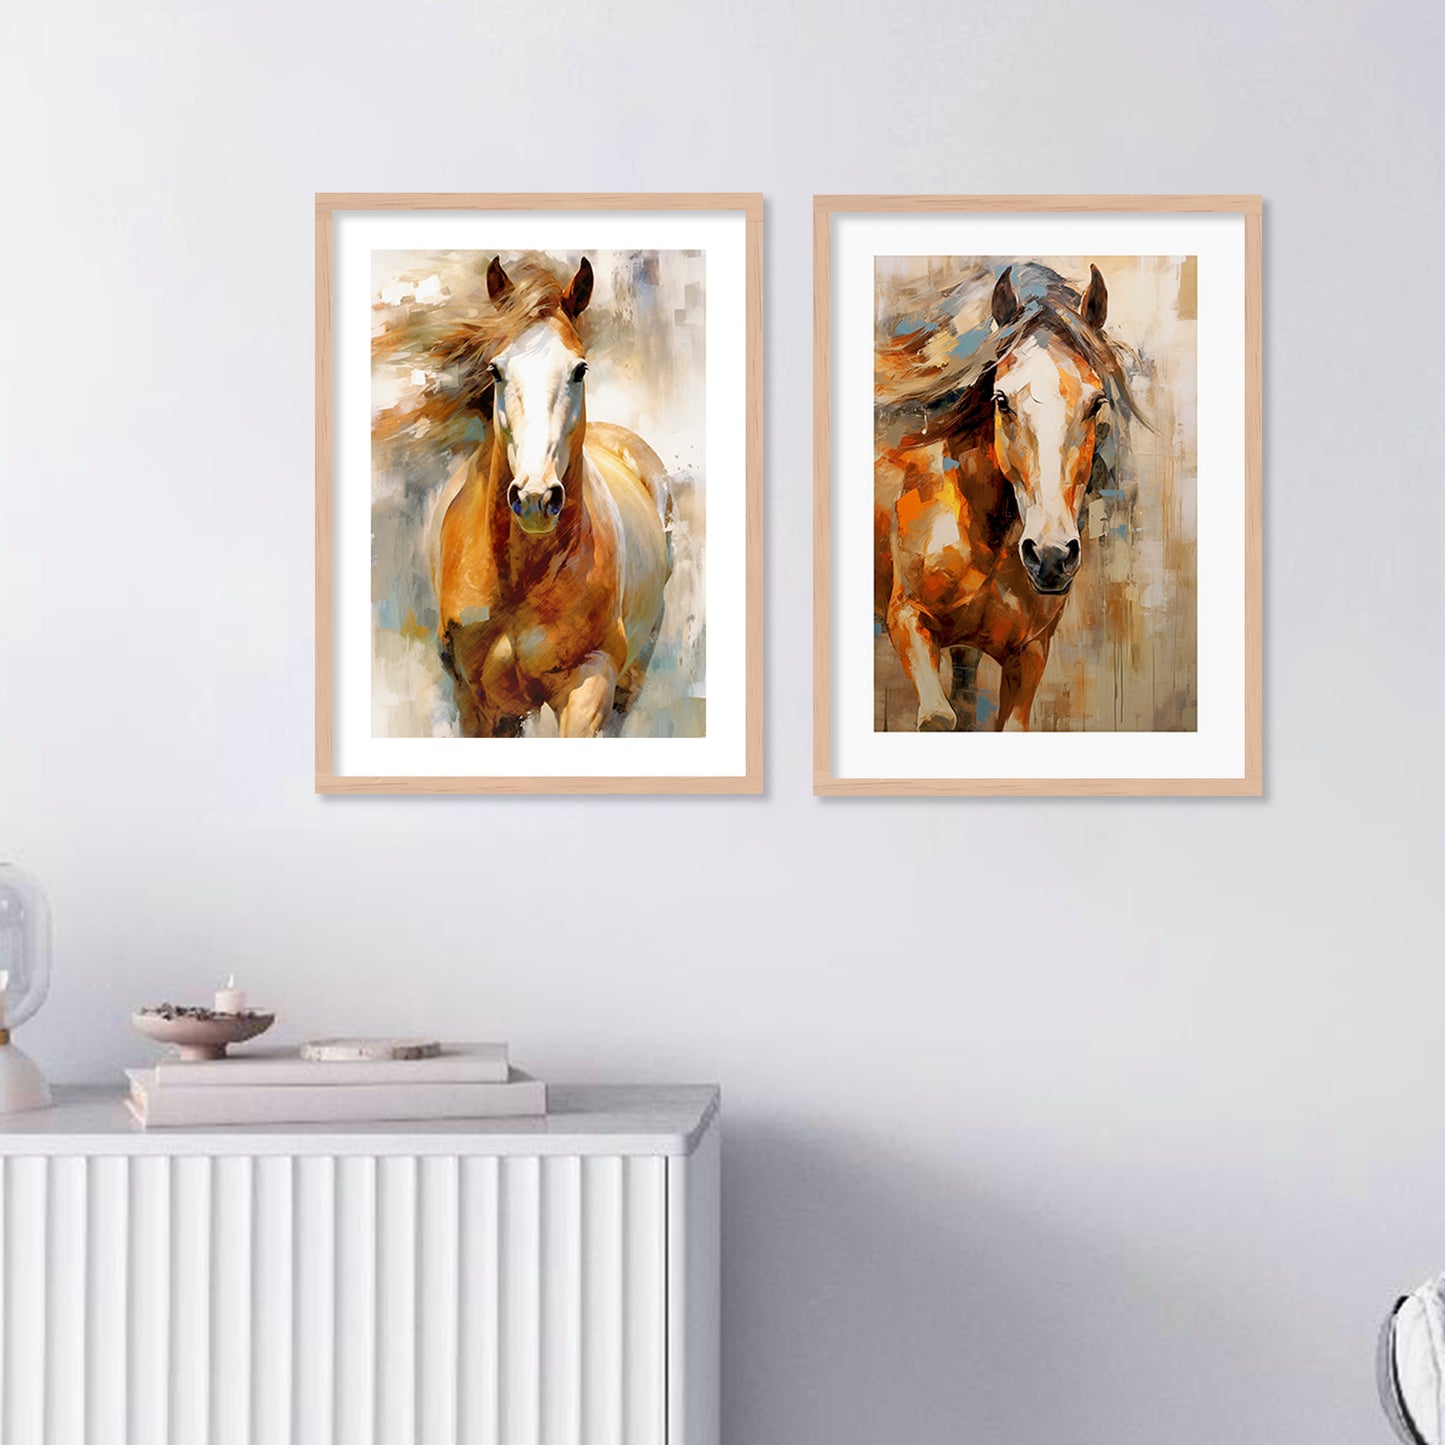 Aesthetic Golden and Black Modern Horse Art Wall Decor Paintings with Frame for Living Room Bedroom Home Decoration